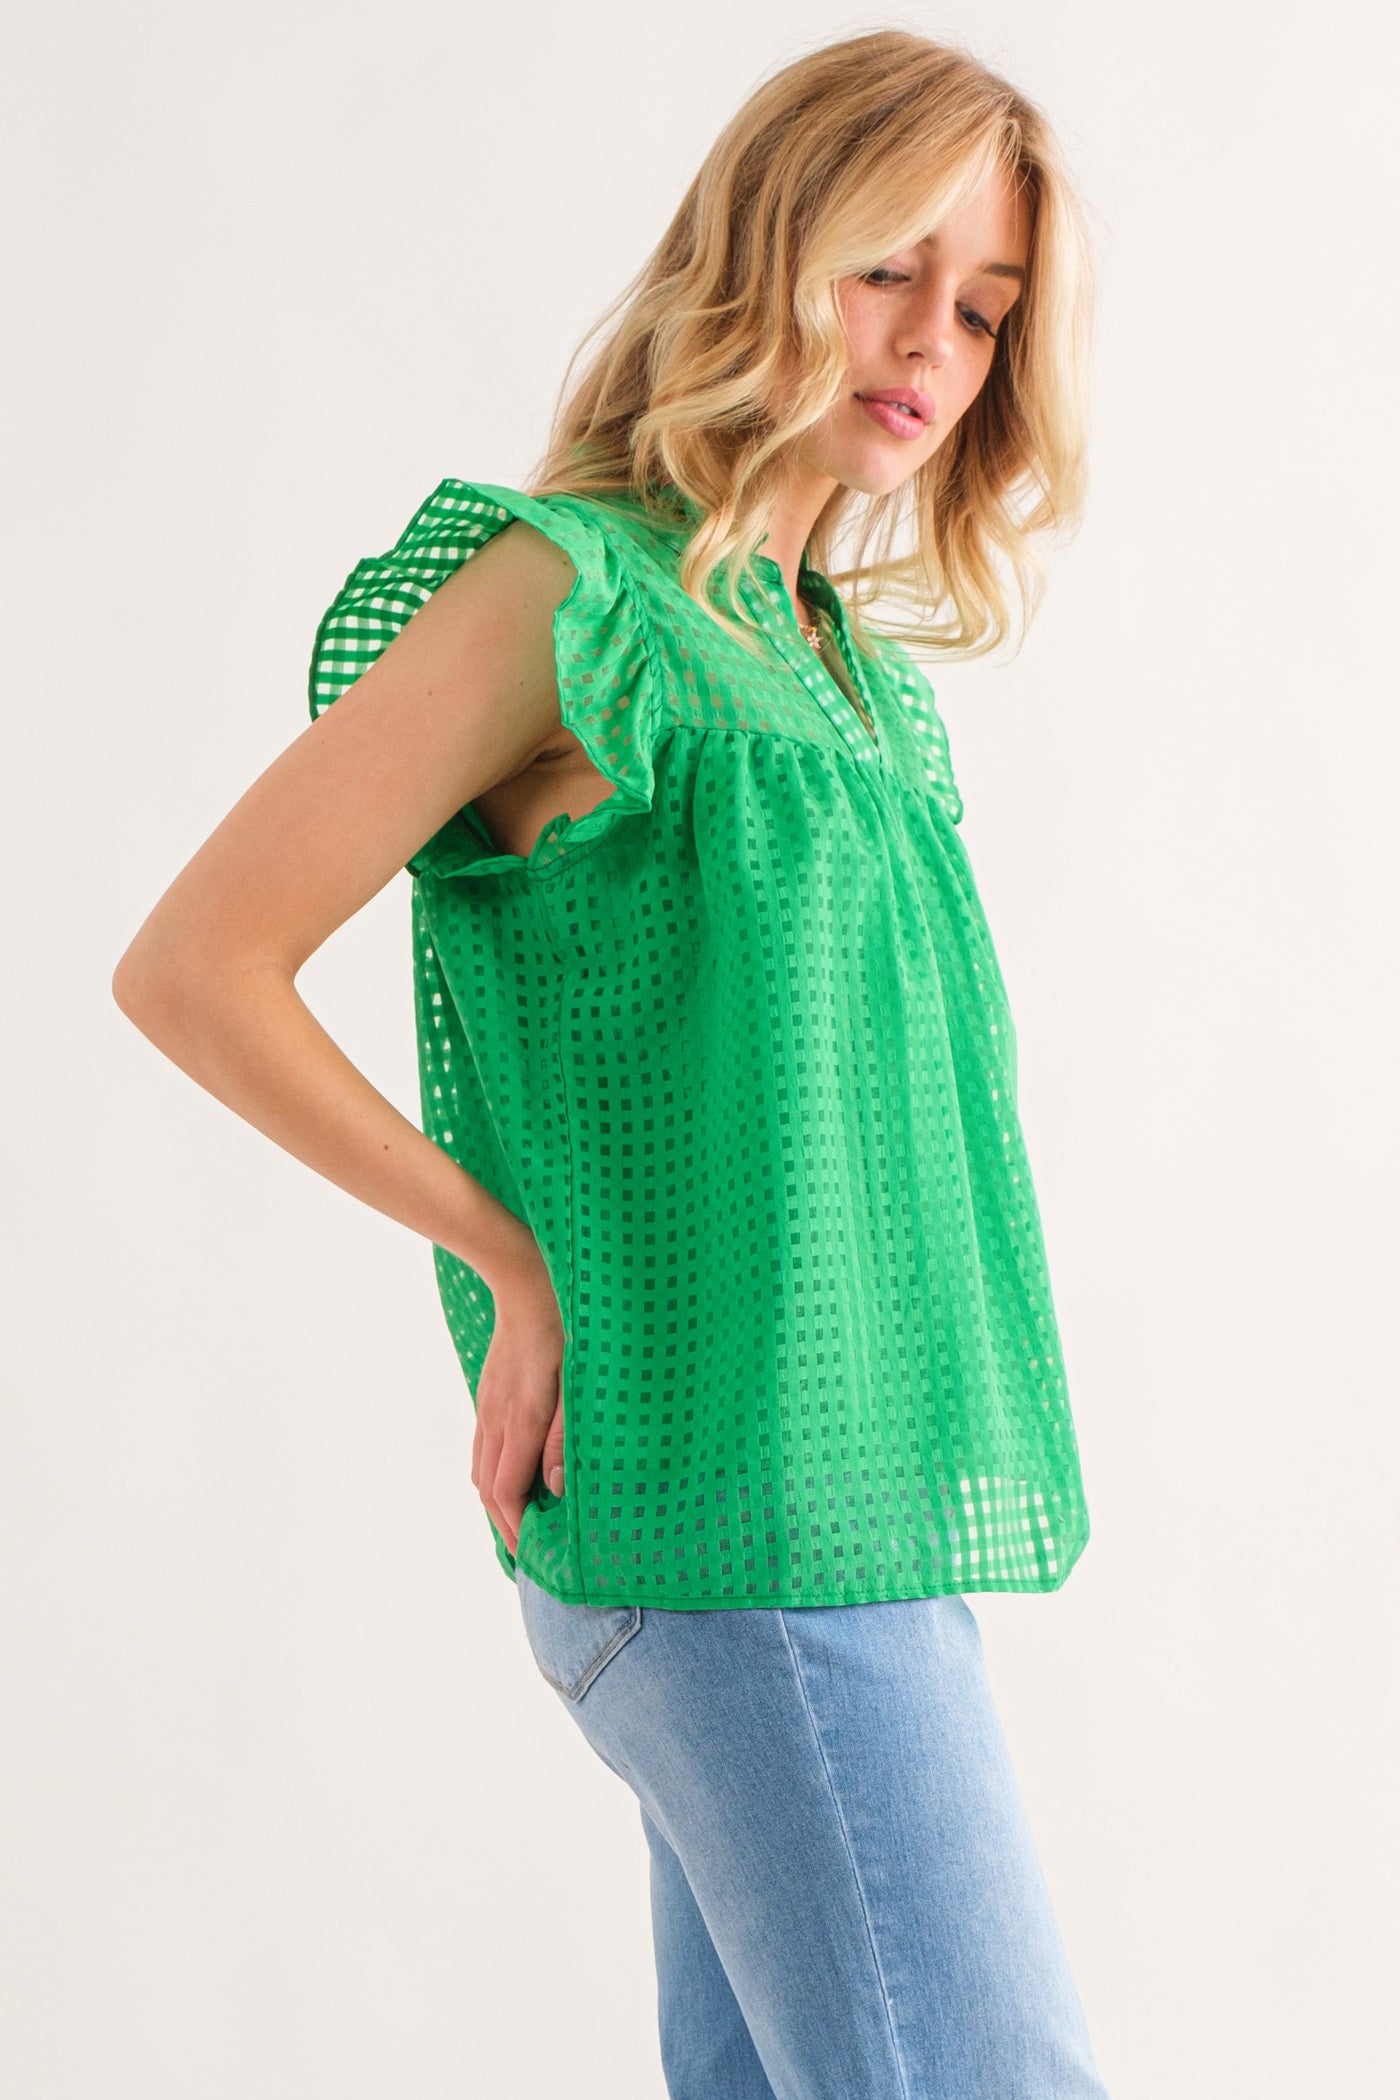 Ruffled my Feather Green Gridded Top